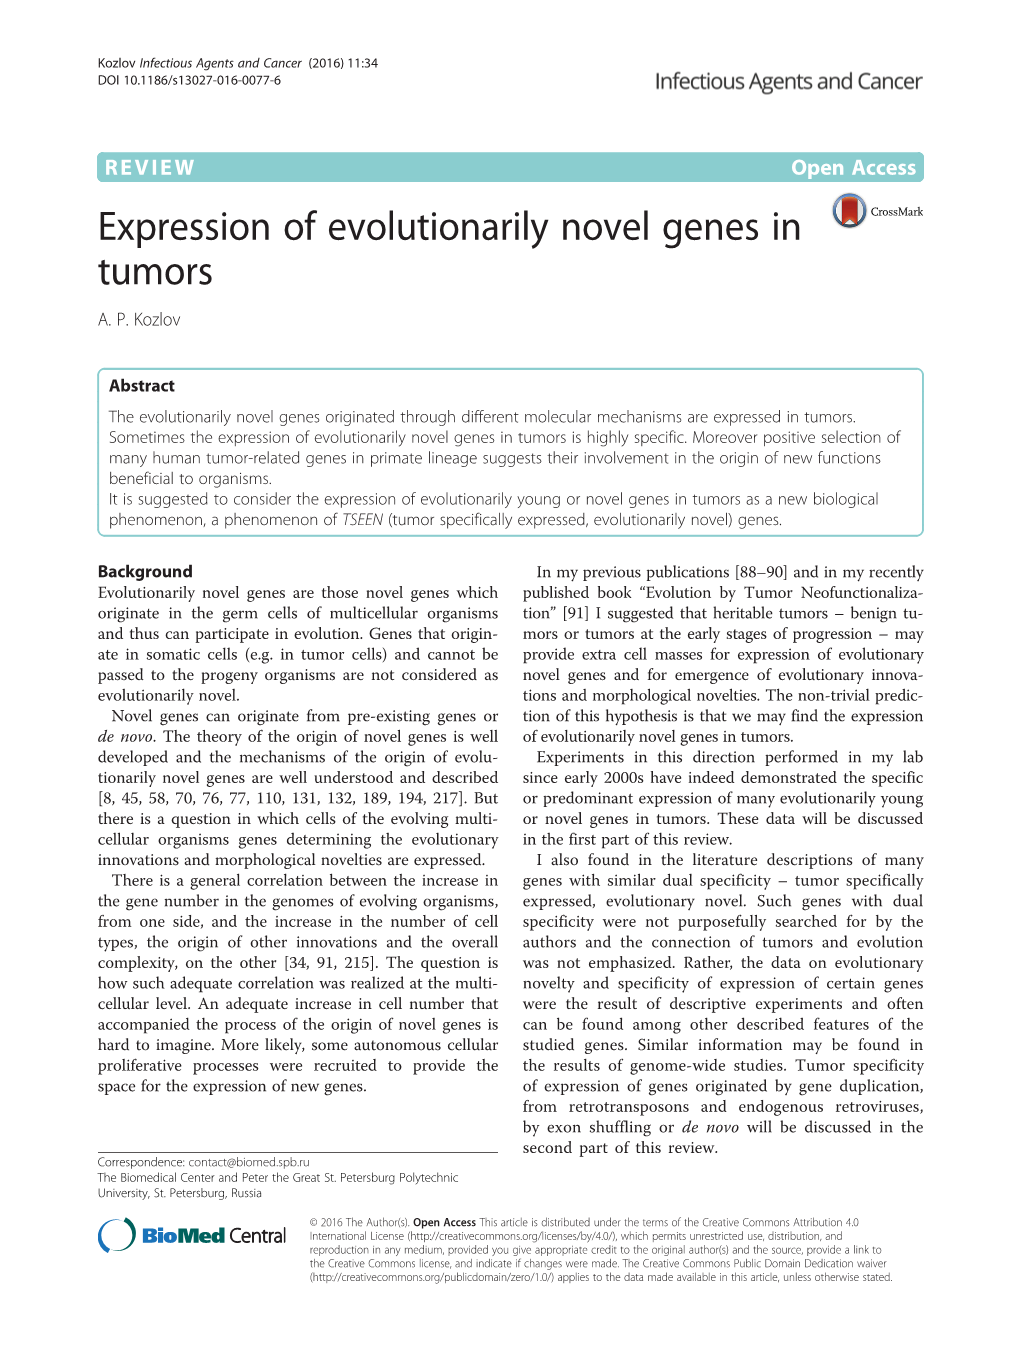 VIEW Open Access Expression of Evolutionarily Novel Genes in Tumors A